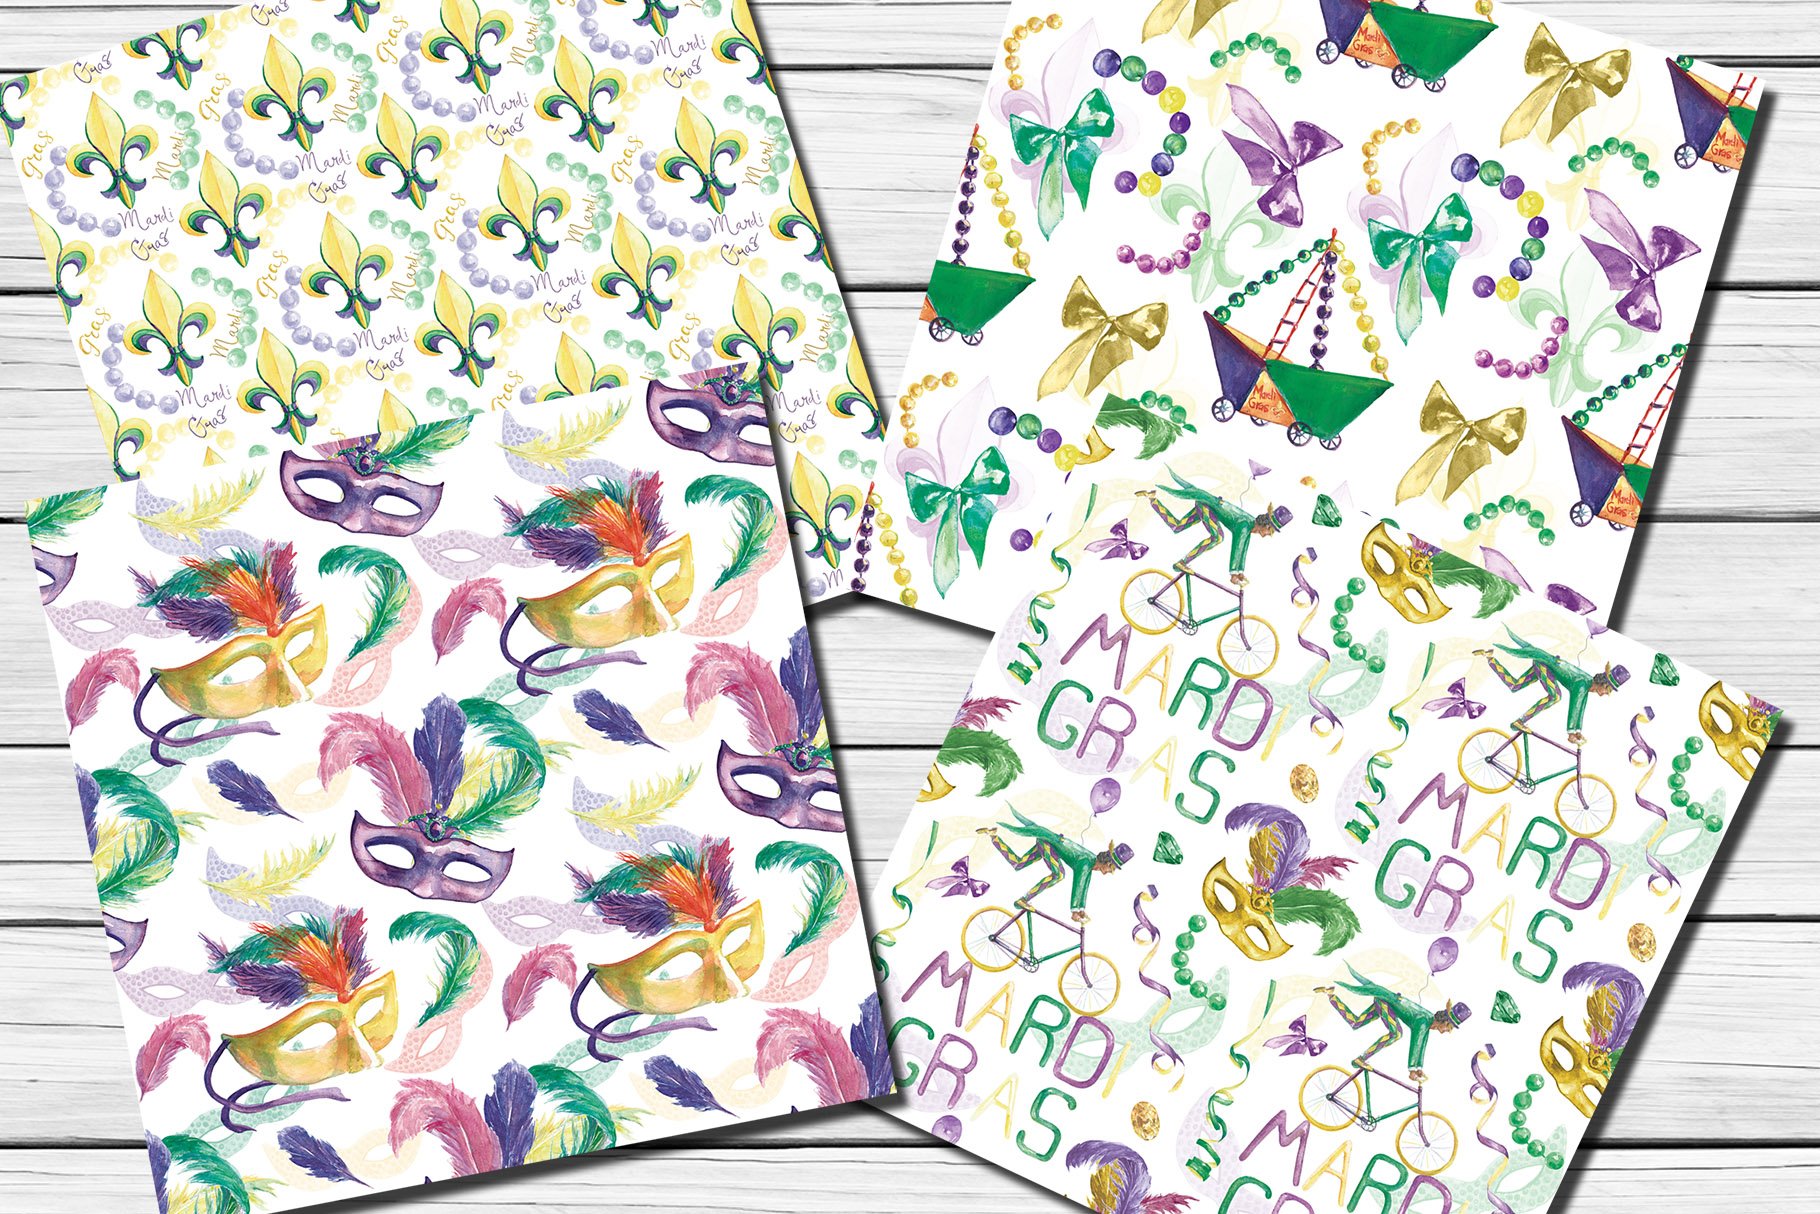 Patterns with the different carnivals prints.